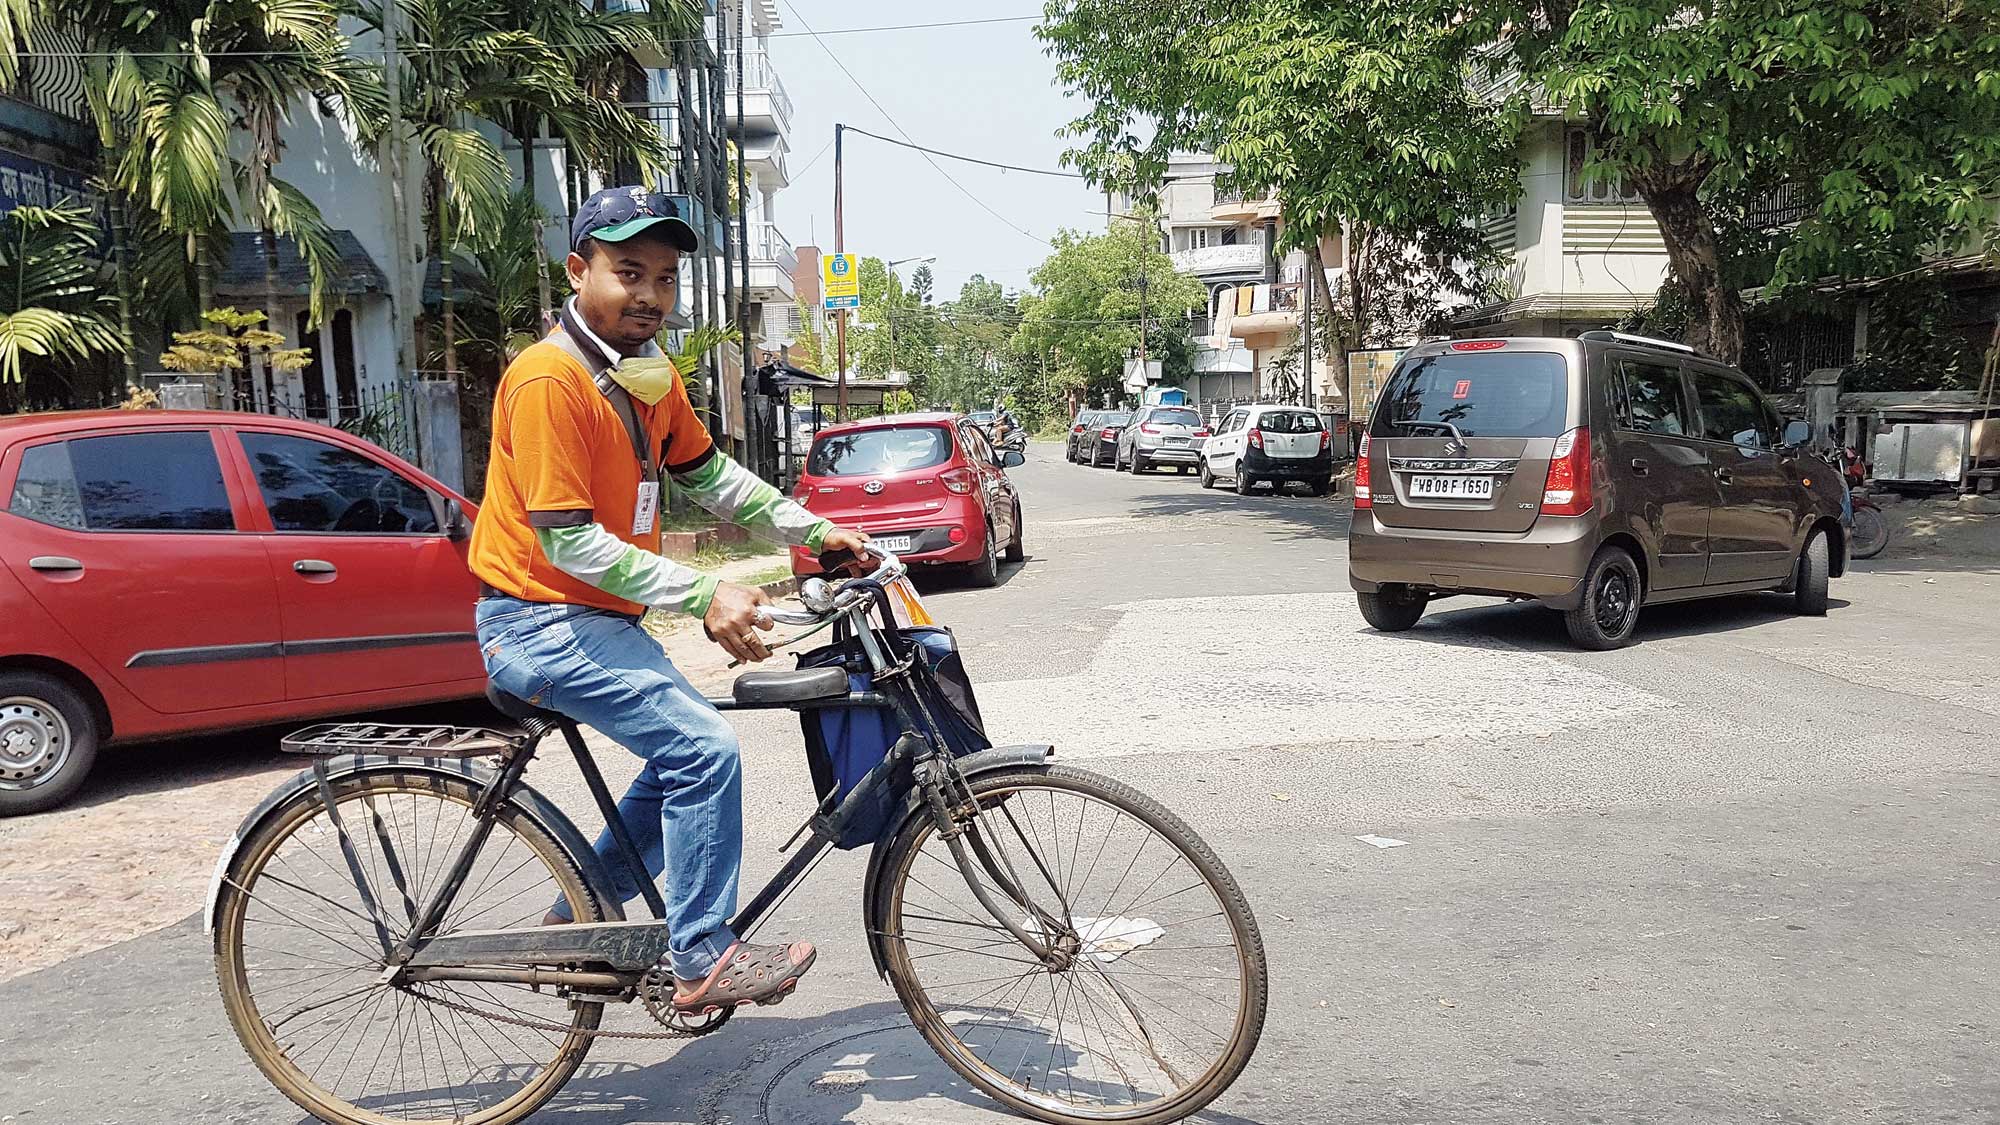 Mithun Adhikary cycles to deliver food to a home on behalf of the app Swiggy